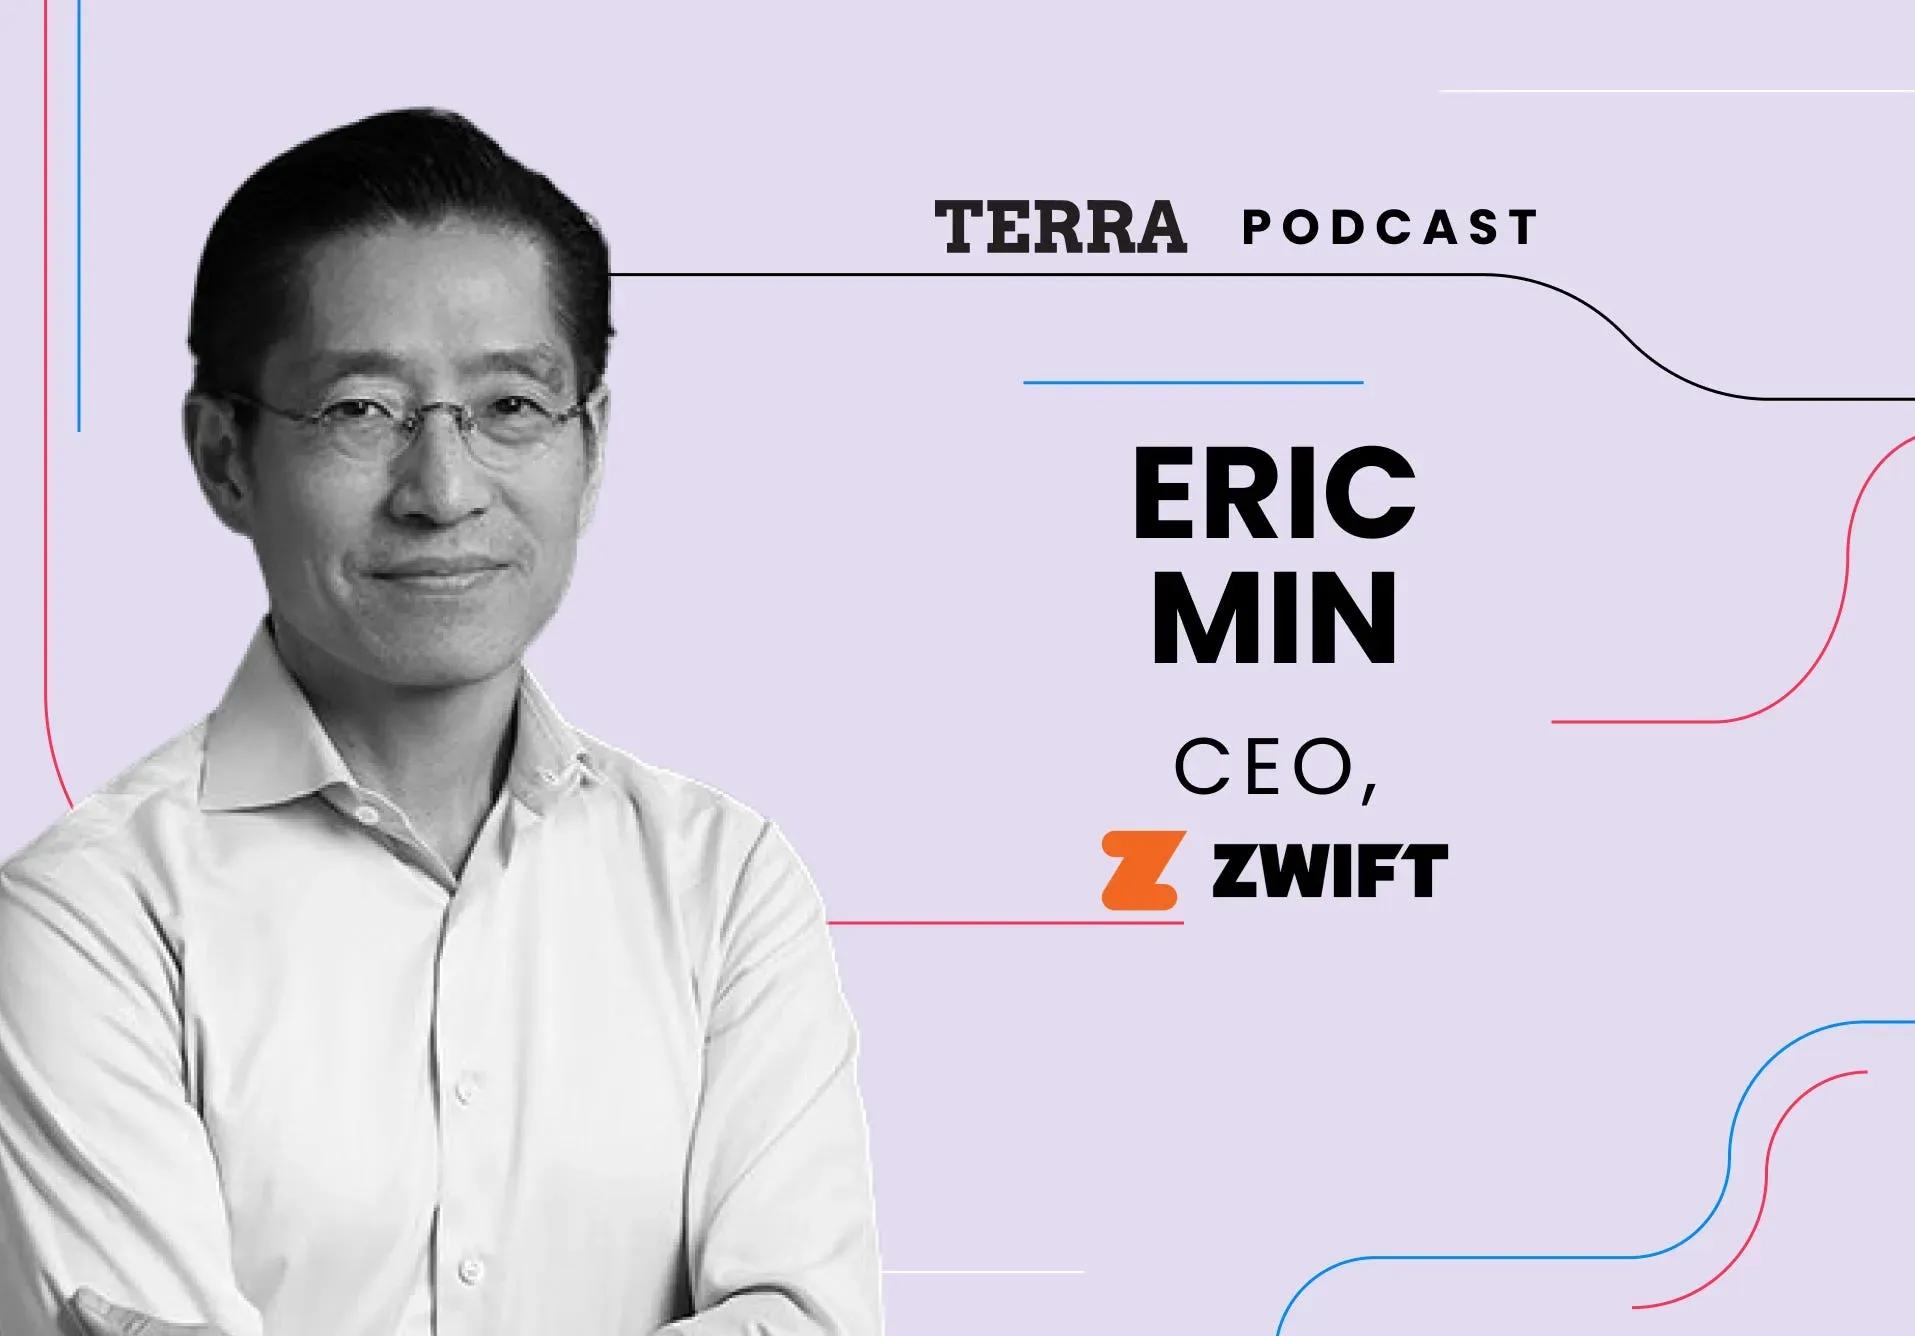 Podcast with Eric Min, Co-founder of Zwift